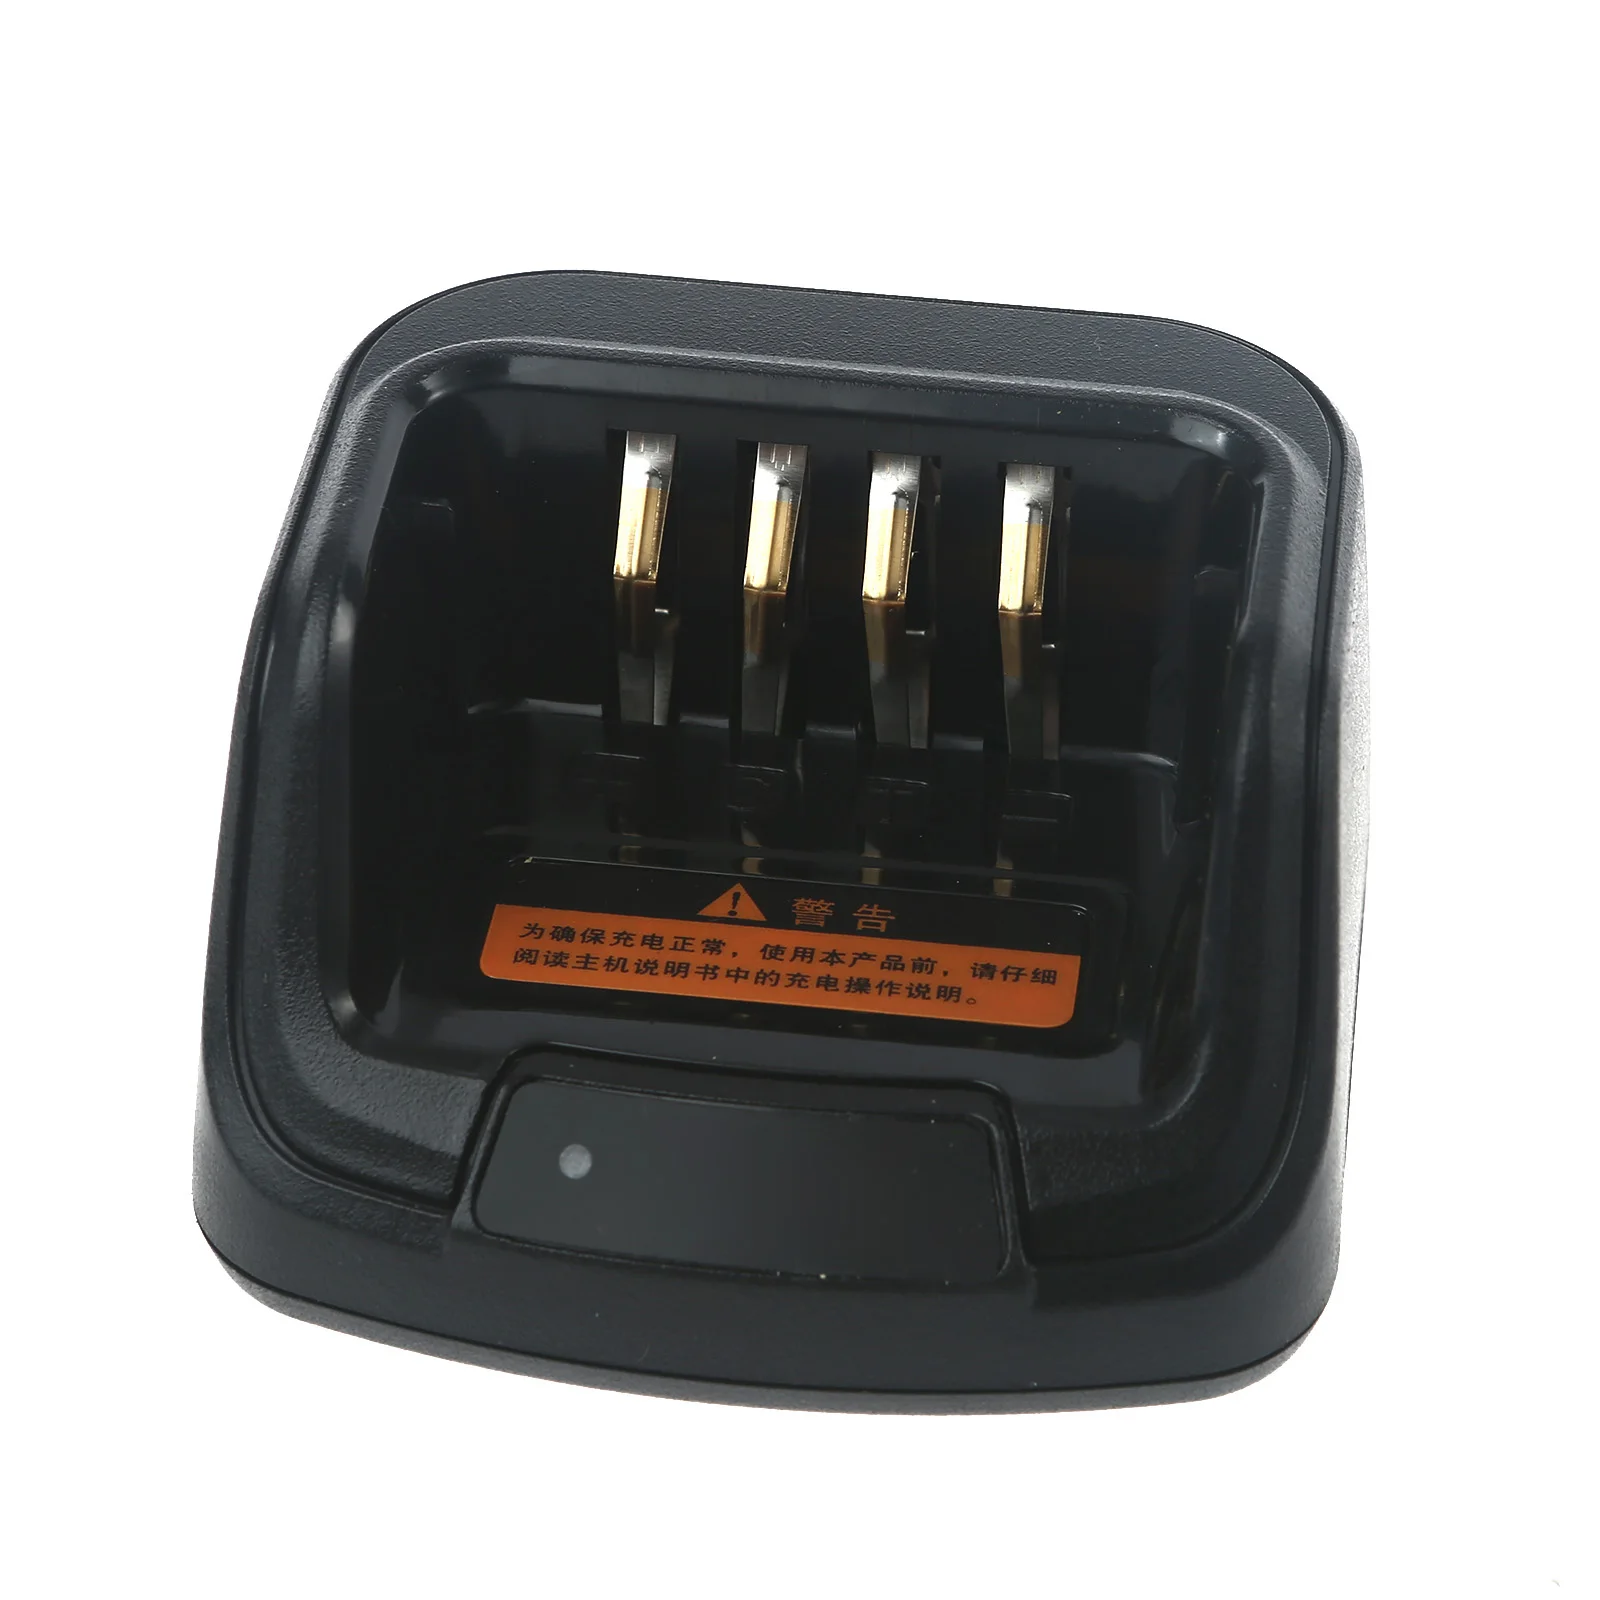 

Charging Base for Hytera HYT PD502/PD505/PD562/PD565/PD580 PD602/PD605/PD662 Ham Two Way Radio 12V DC 1A 850mAh